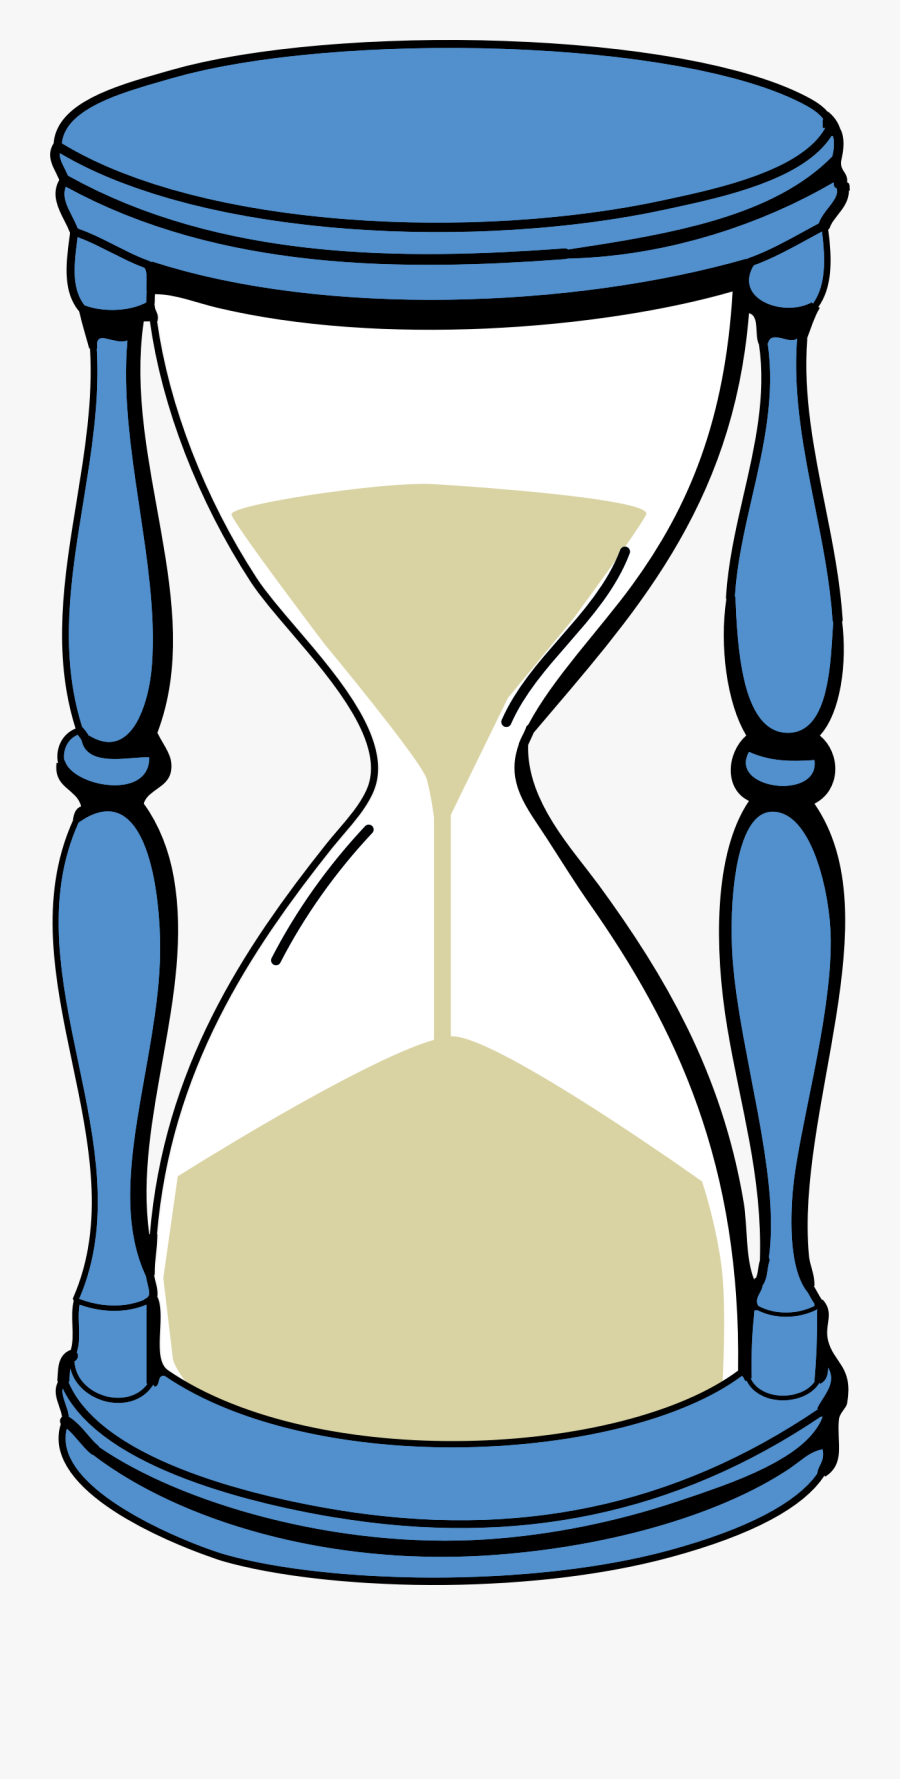 Hourglass With Sand - Time Clipart, Transparent Clipart